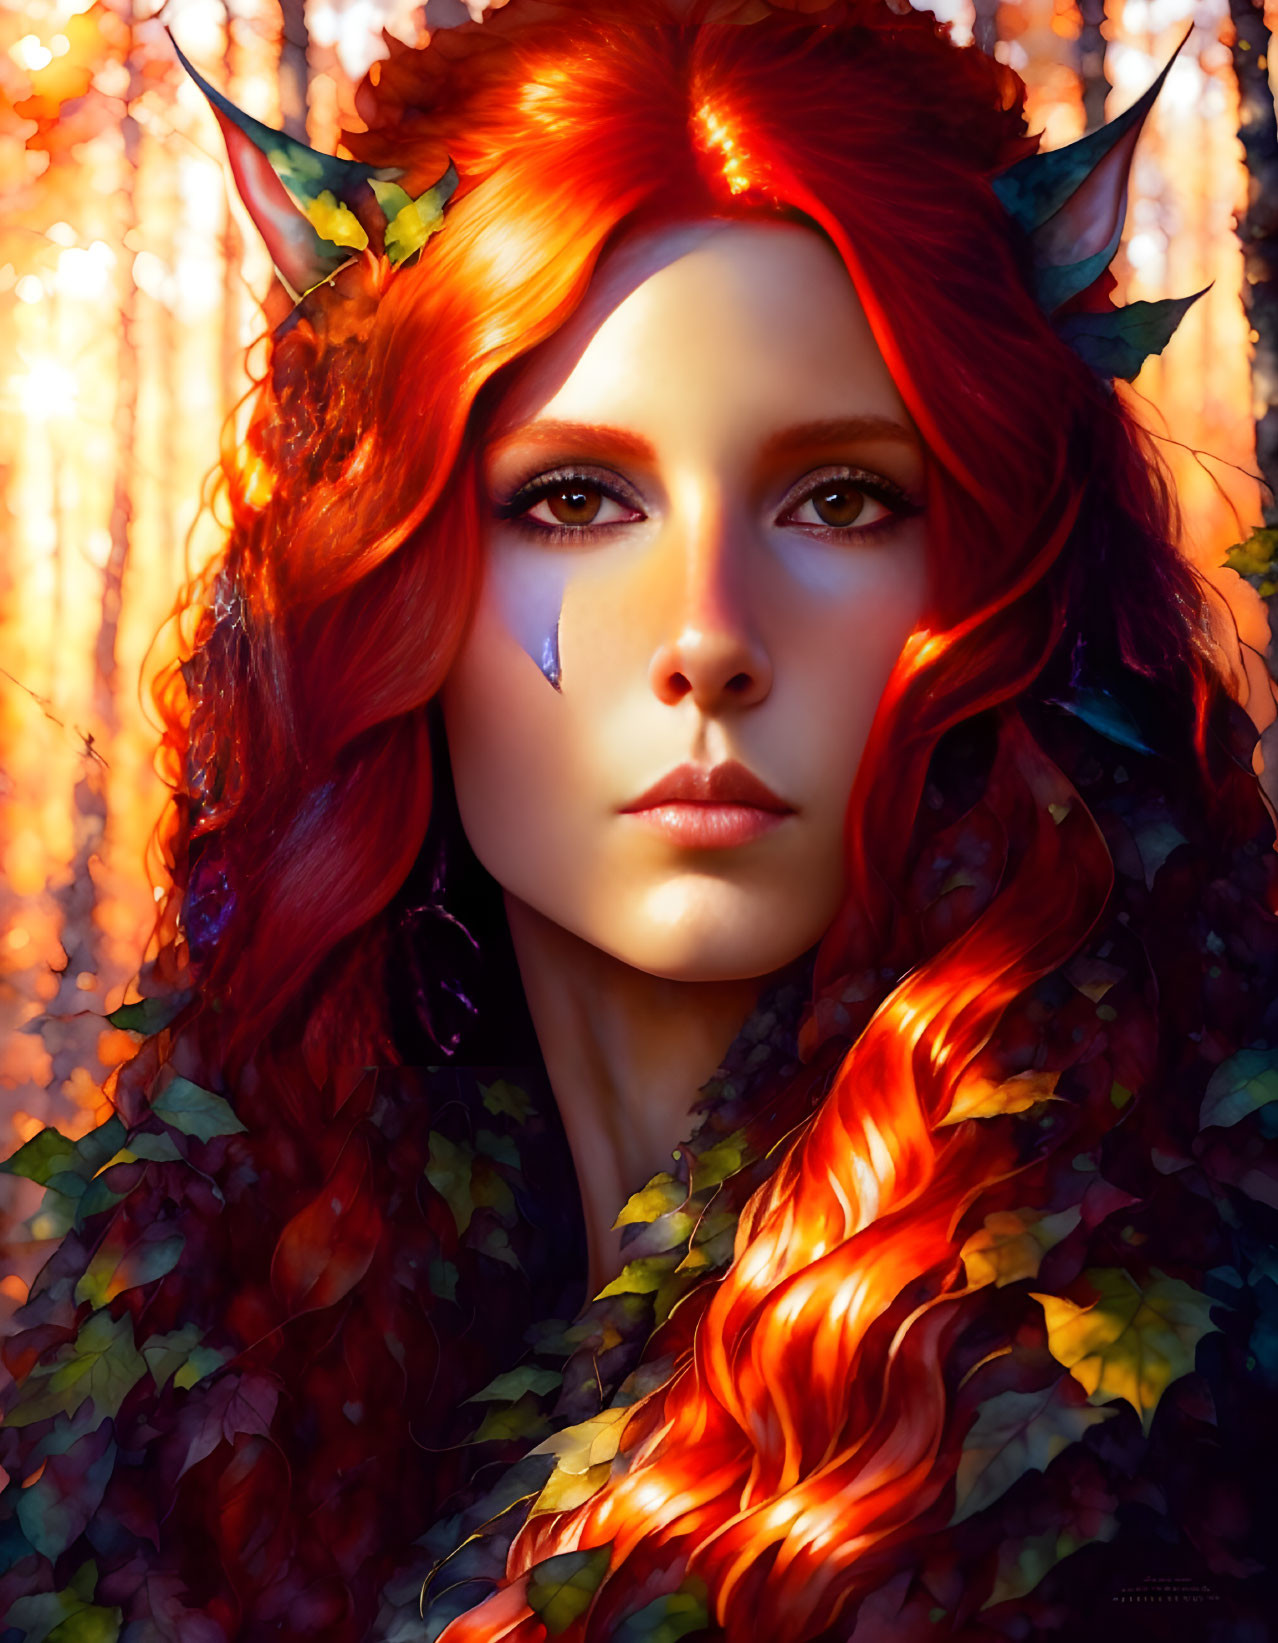 Fantasy portrait of a woman with red hair and leafy accents